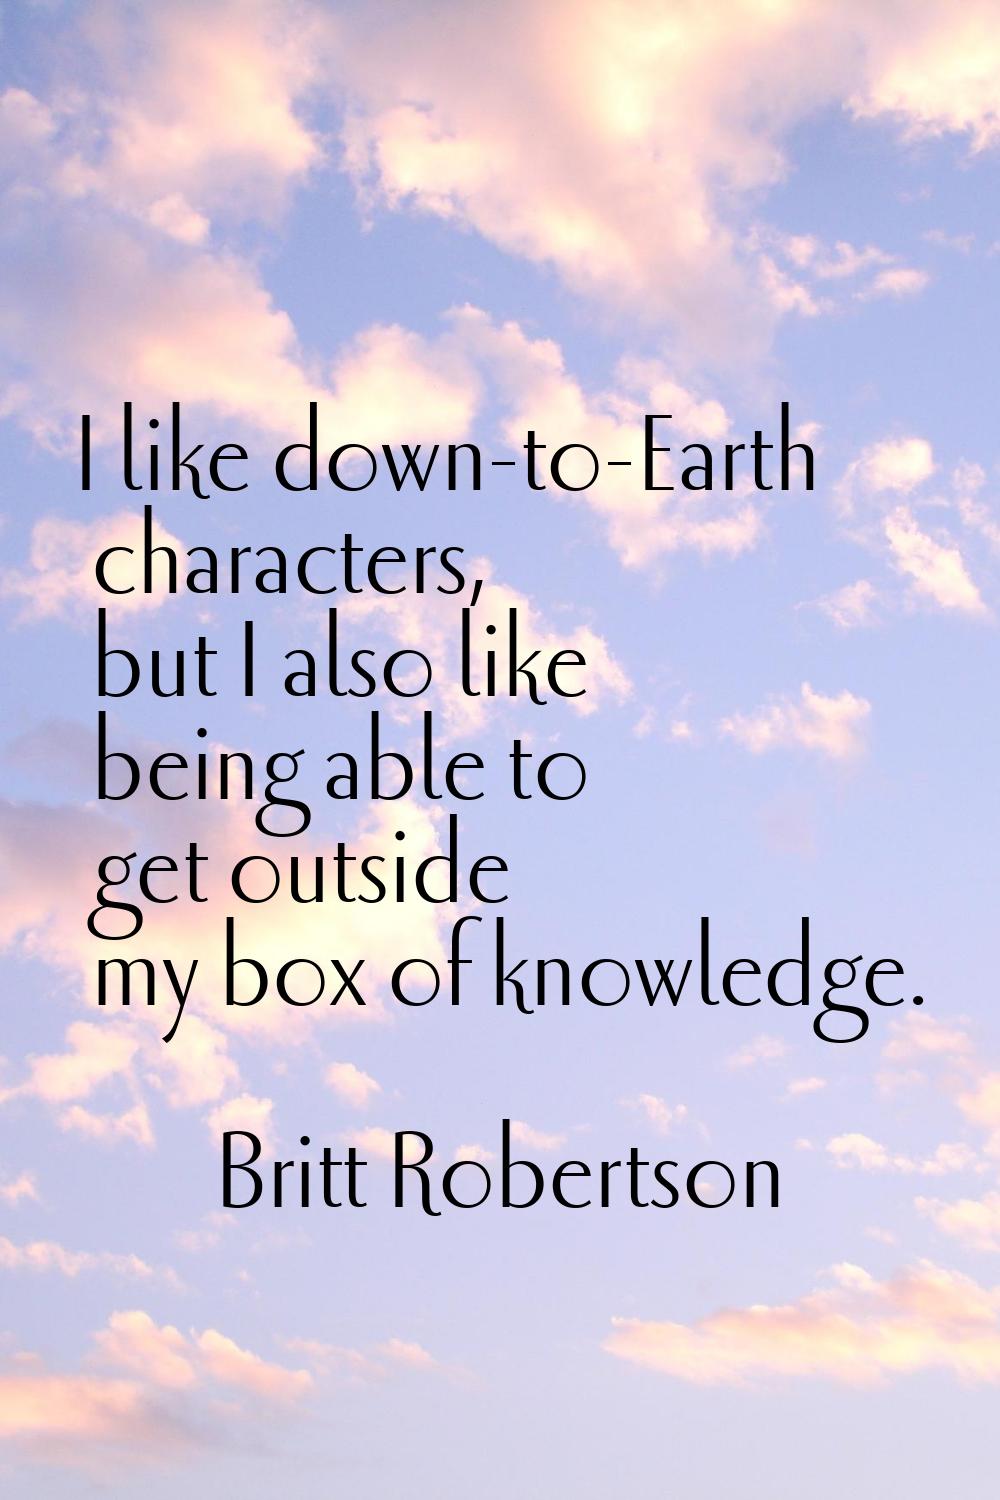 I like down-to-Earth characters, but I also like being able to get outside my box of knowledge.